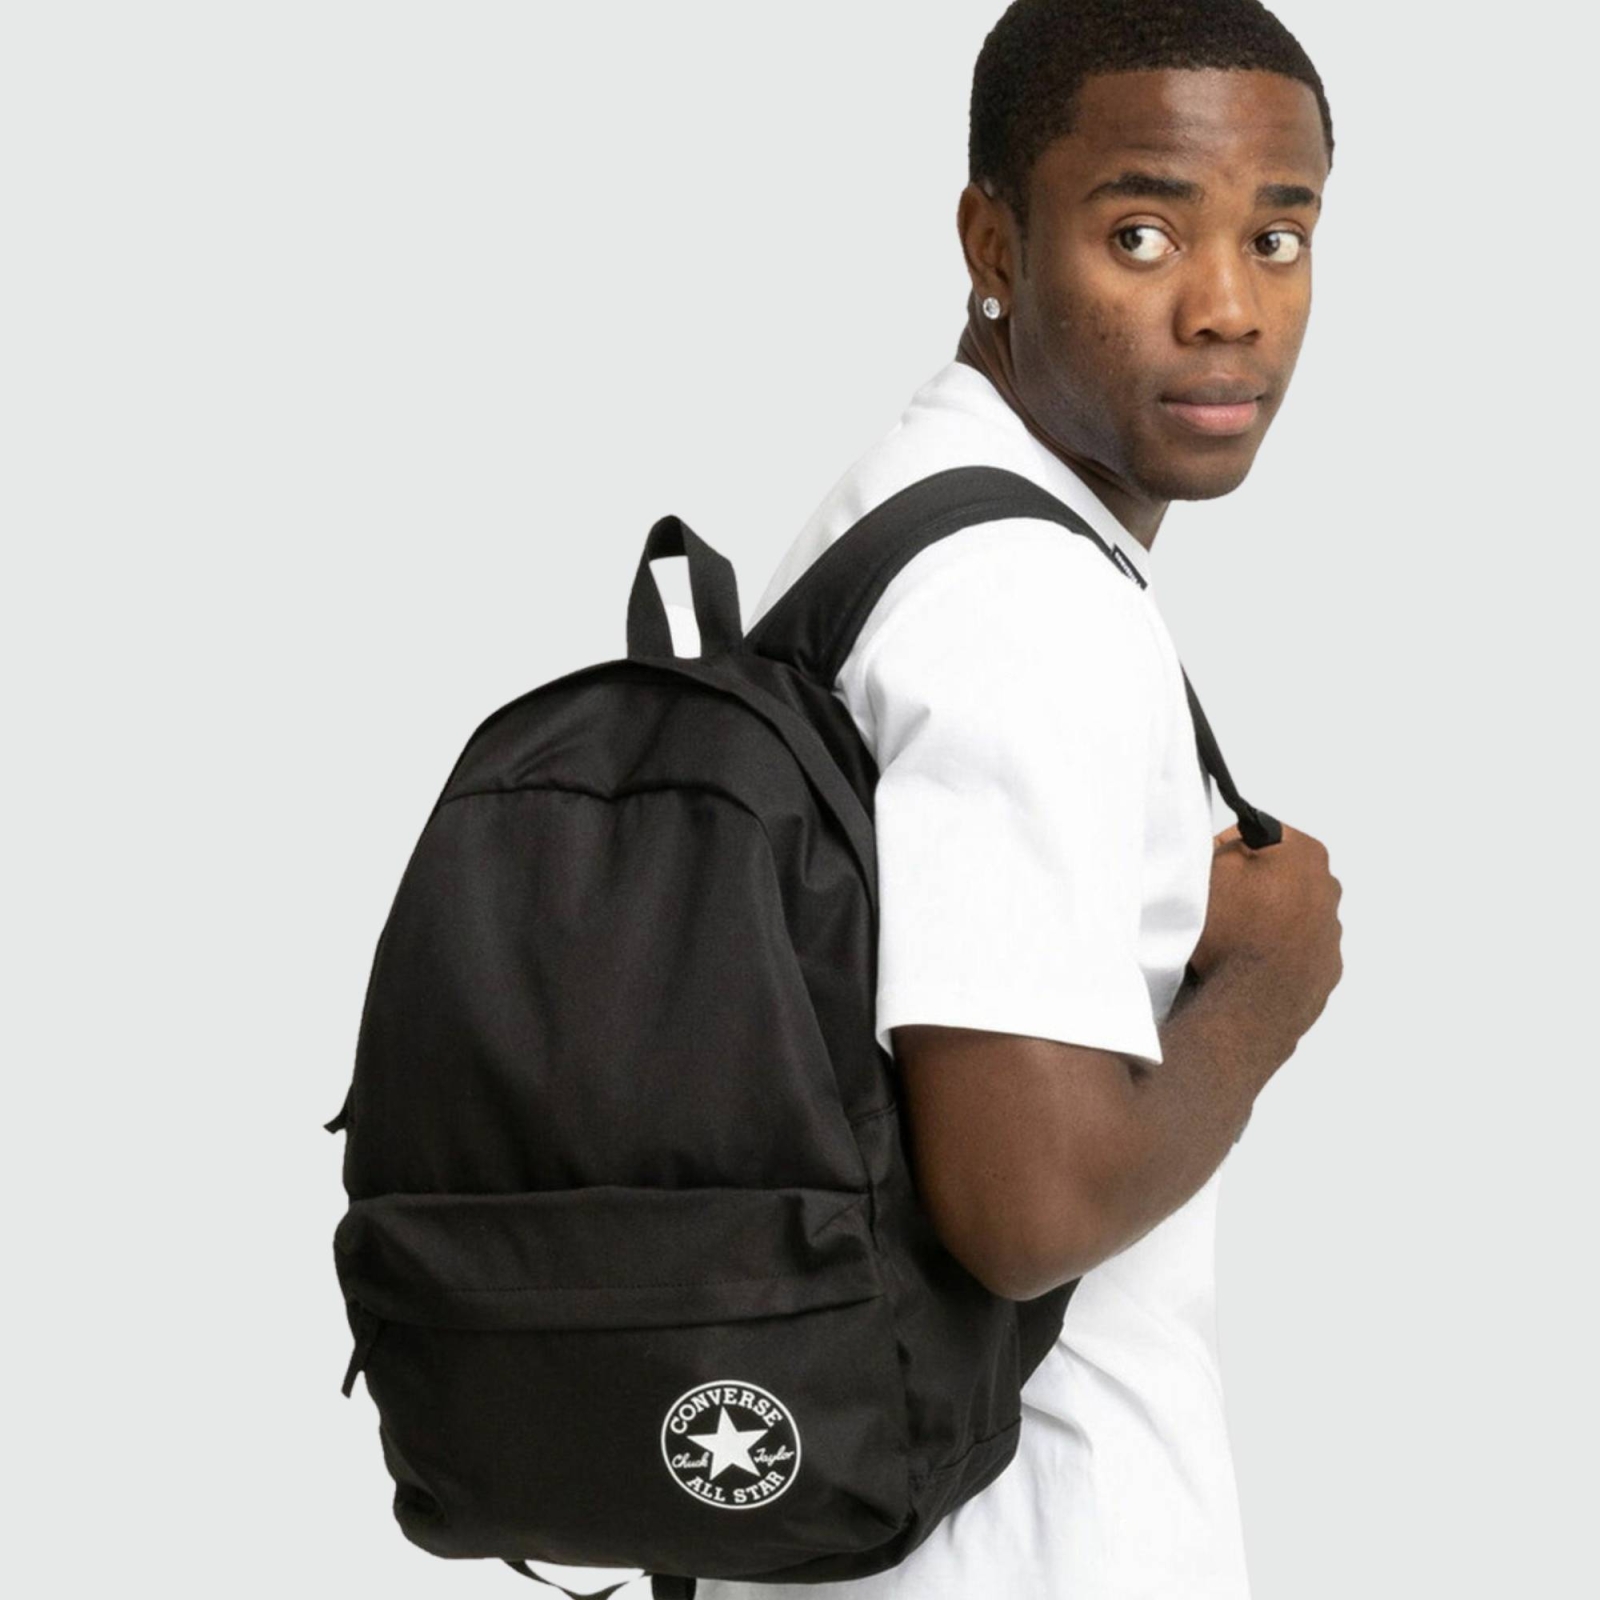 CONVERSE SPEED 3 BACKPACK